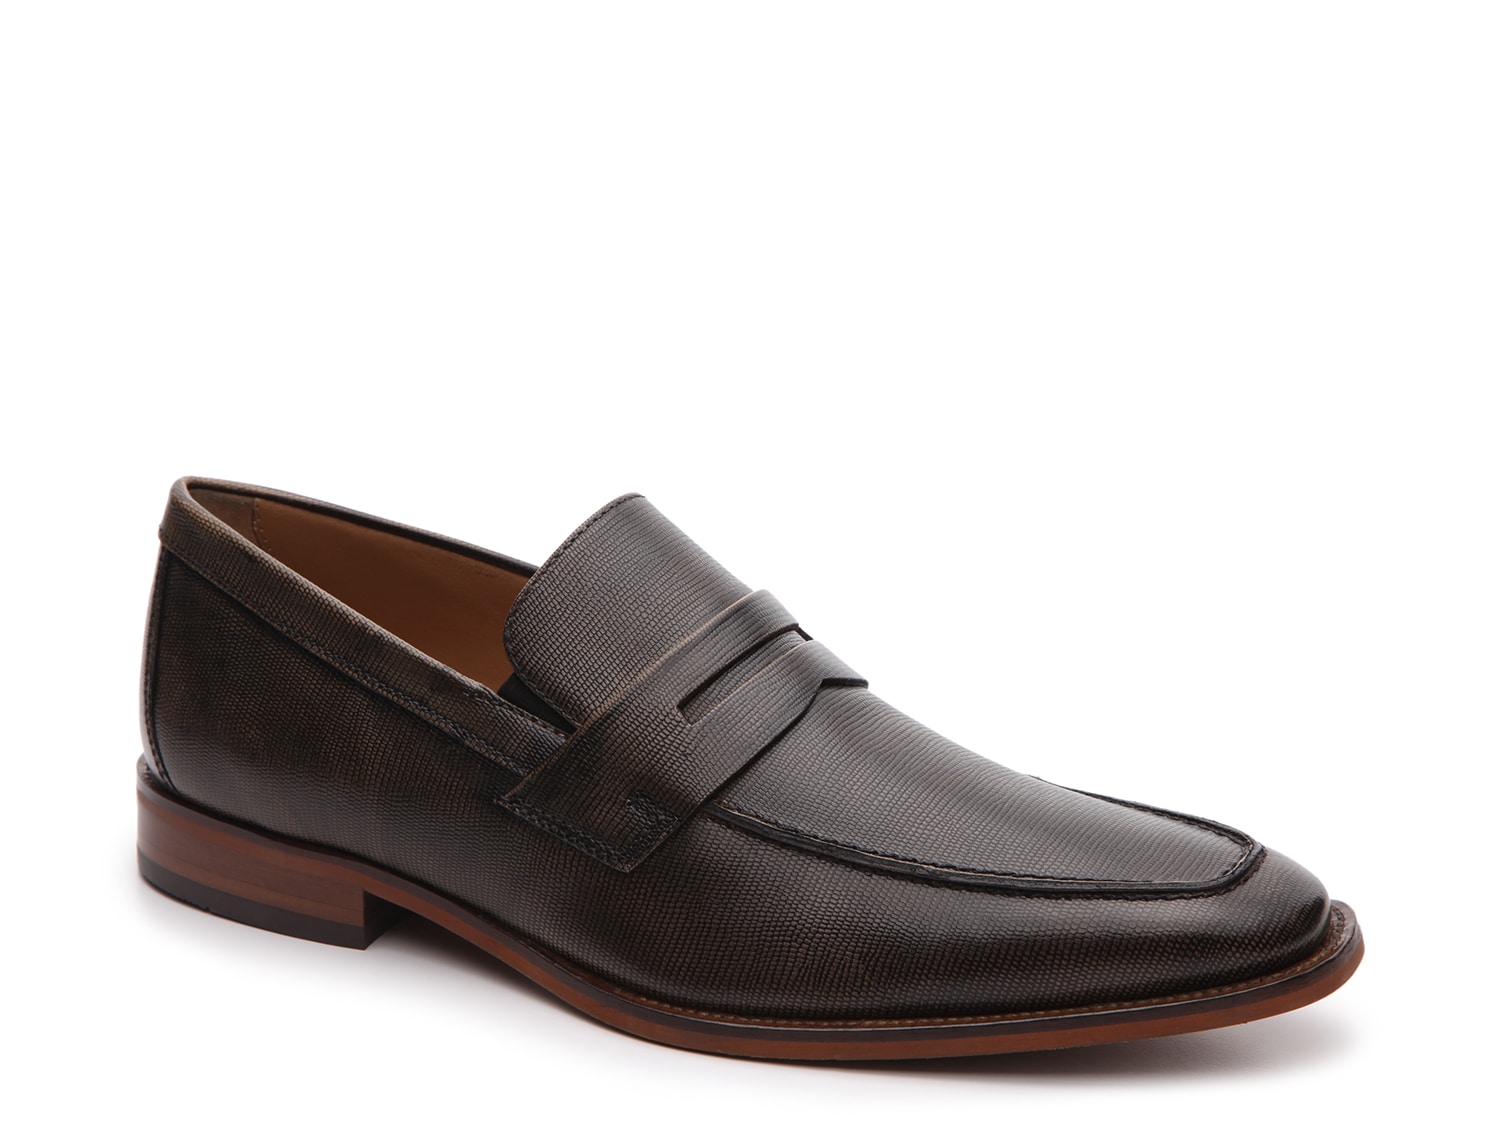 Florsheim Sabato Penny Loafer - Free Shipping | DSW